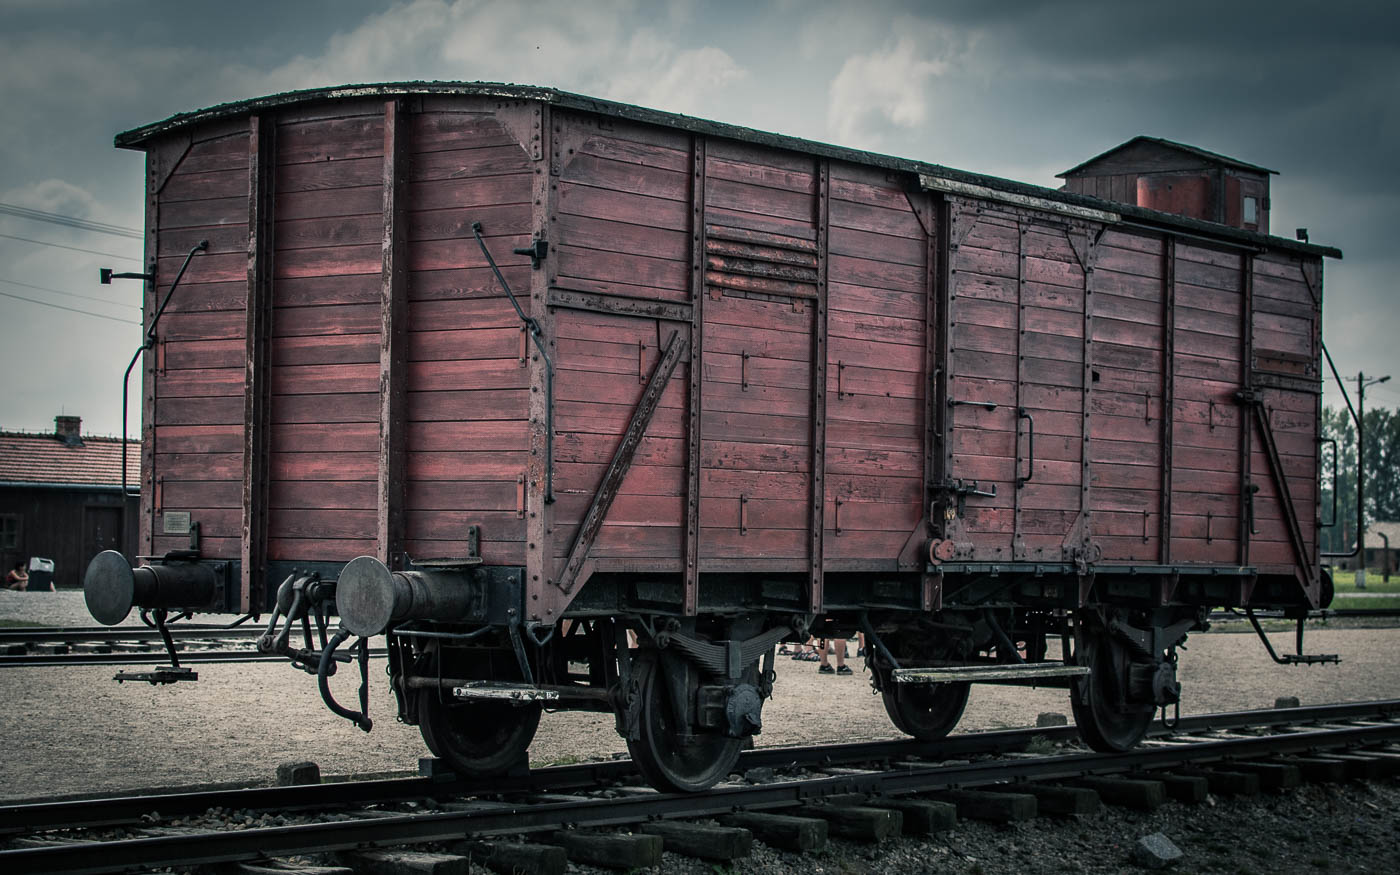 A railroad car has been symbolically parked next to the ramp where the SS carried out selection, sending the majority of the deported people to death in the gas chambers.